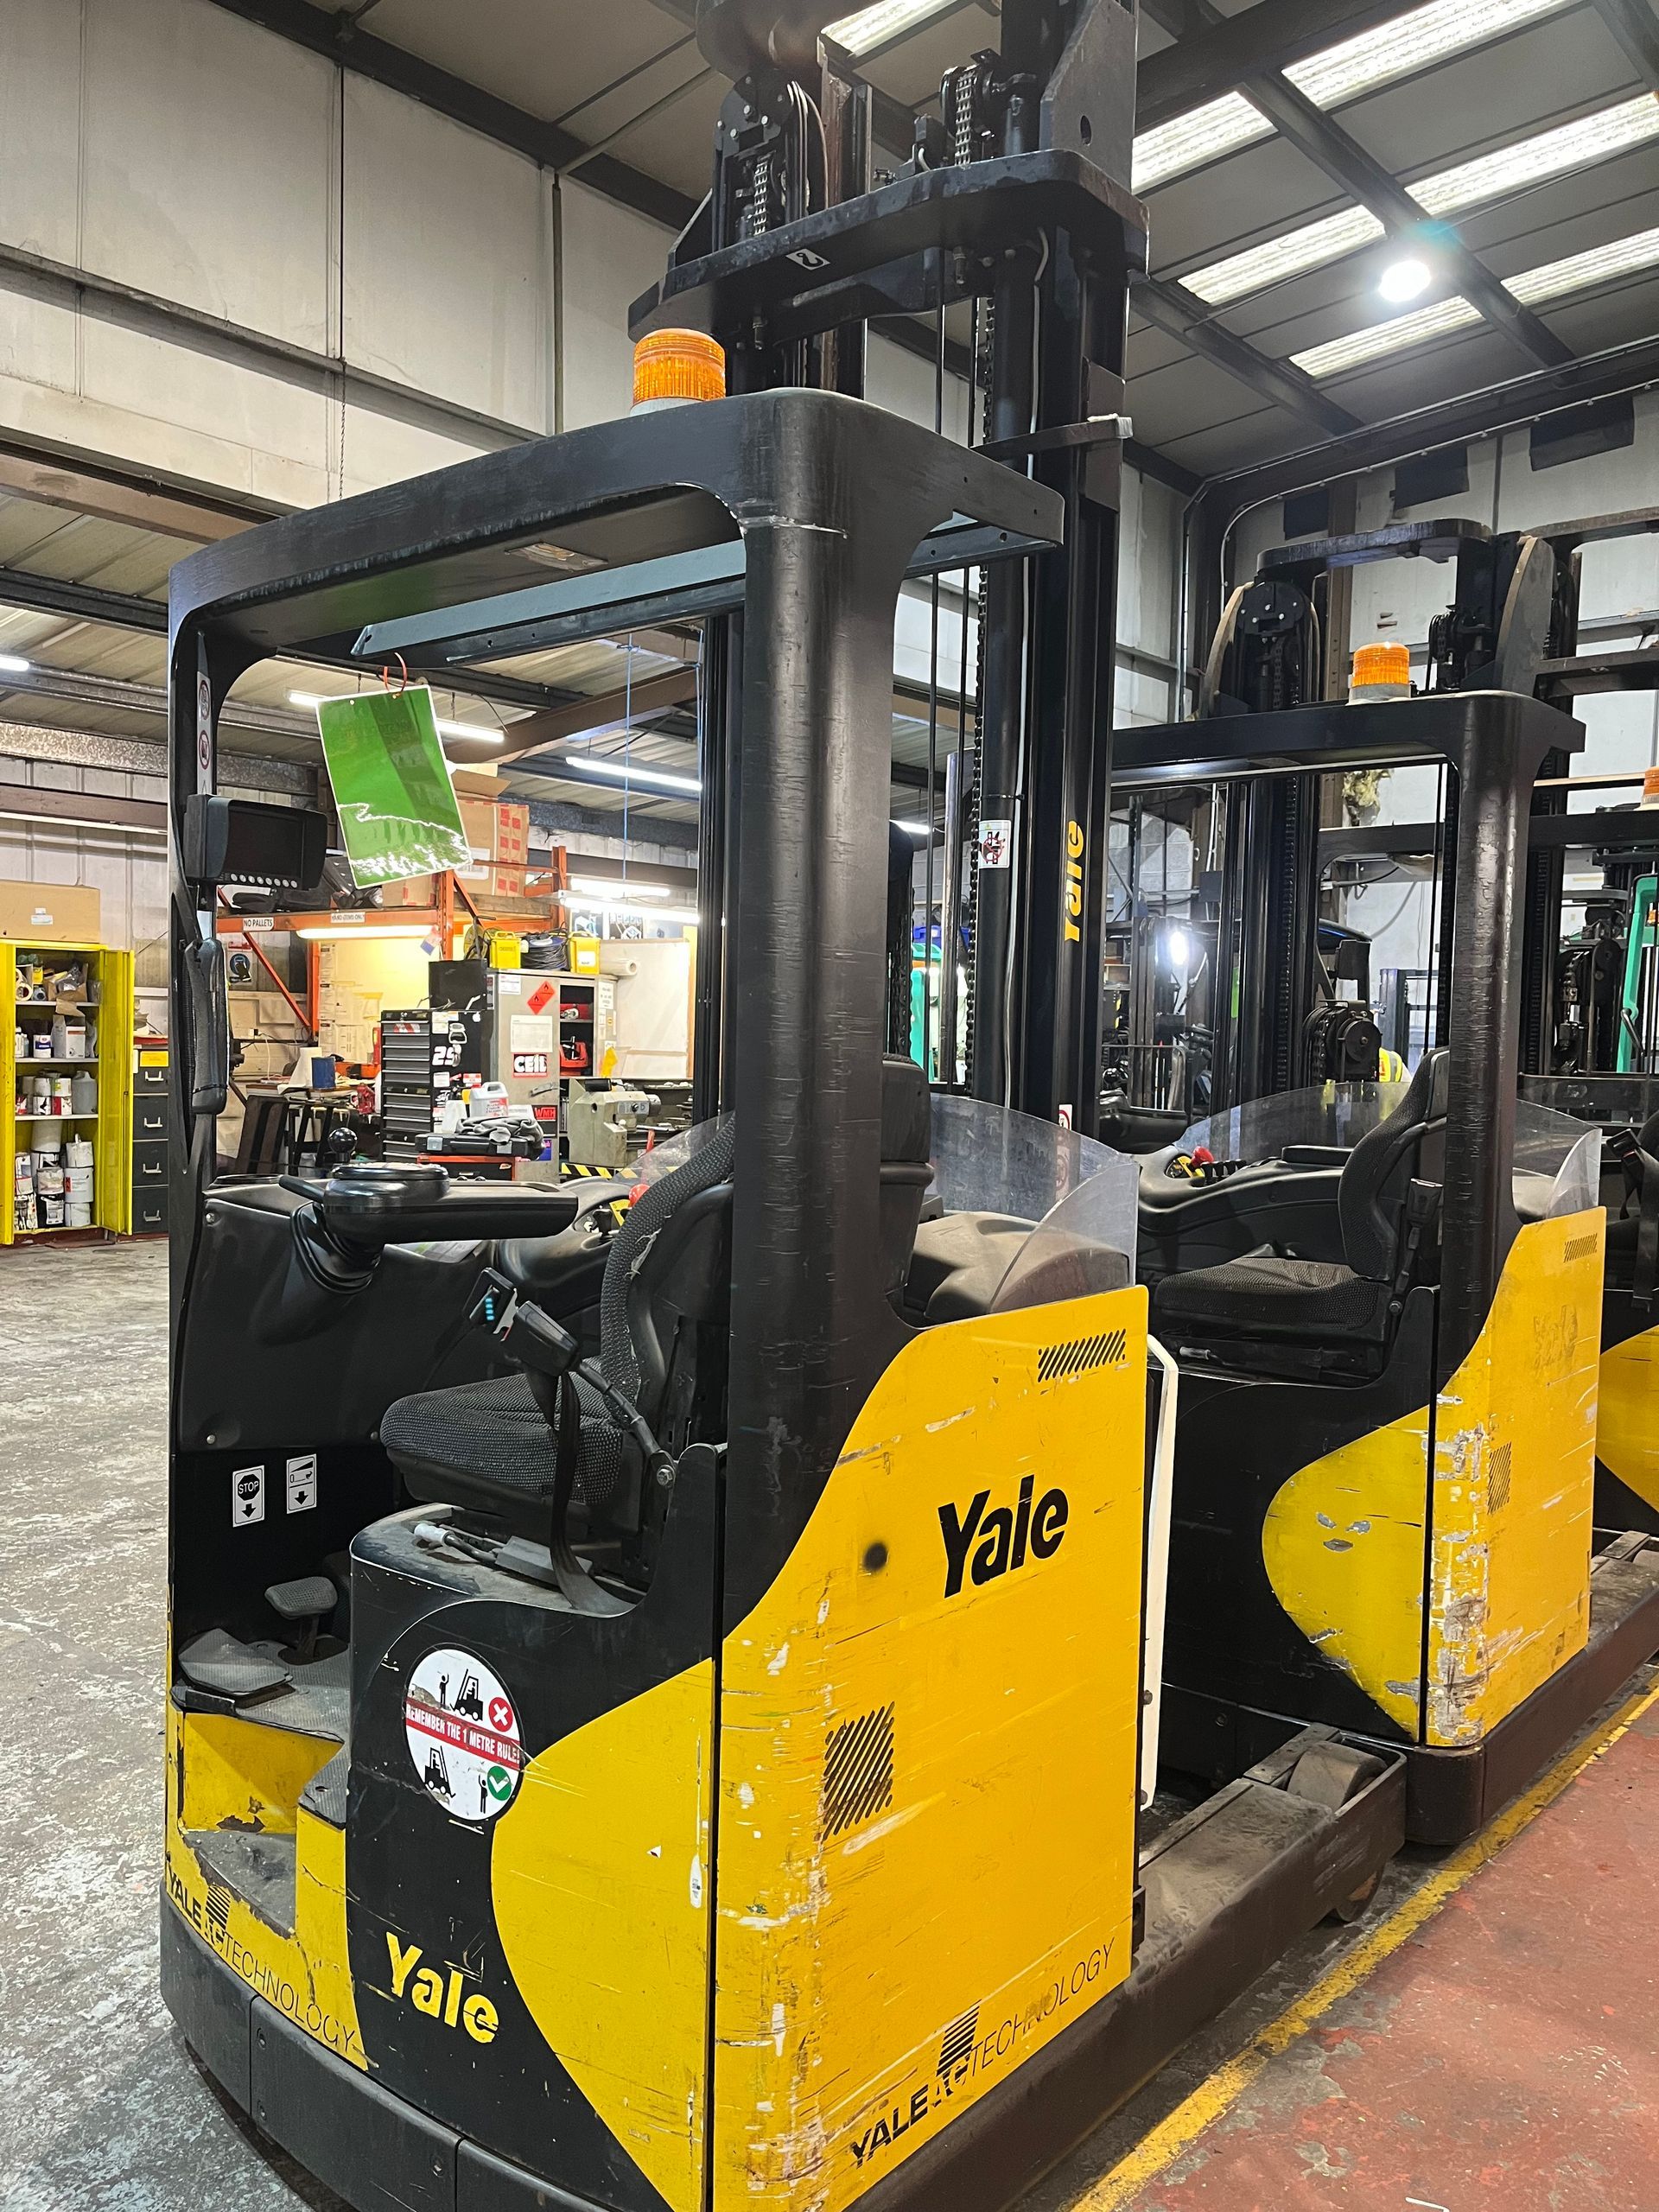 A yellow and black forklift is parked in a warehouse.